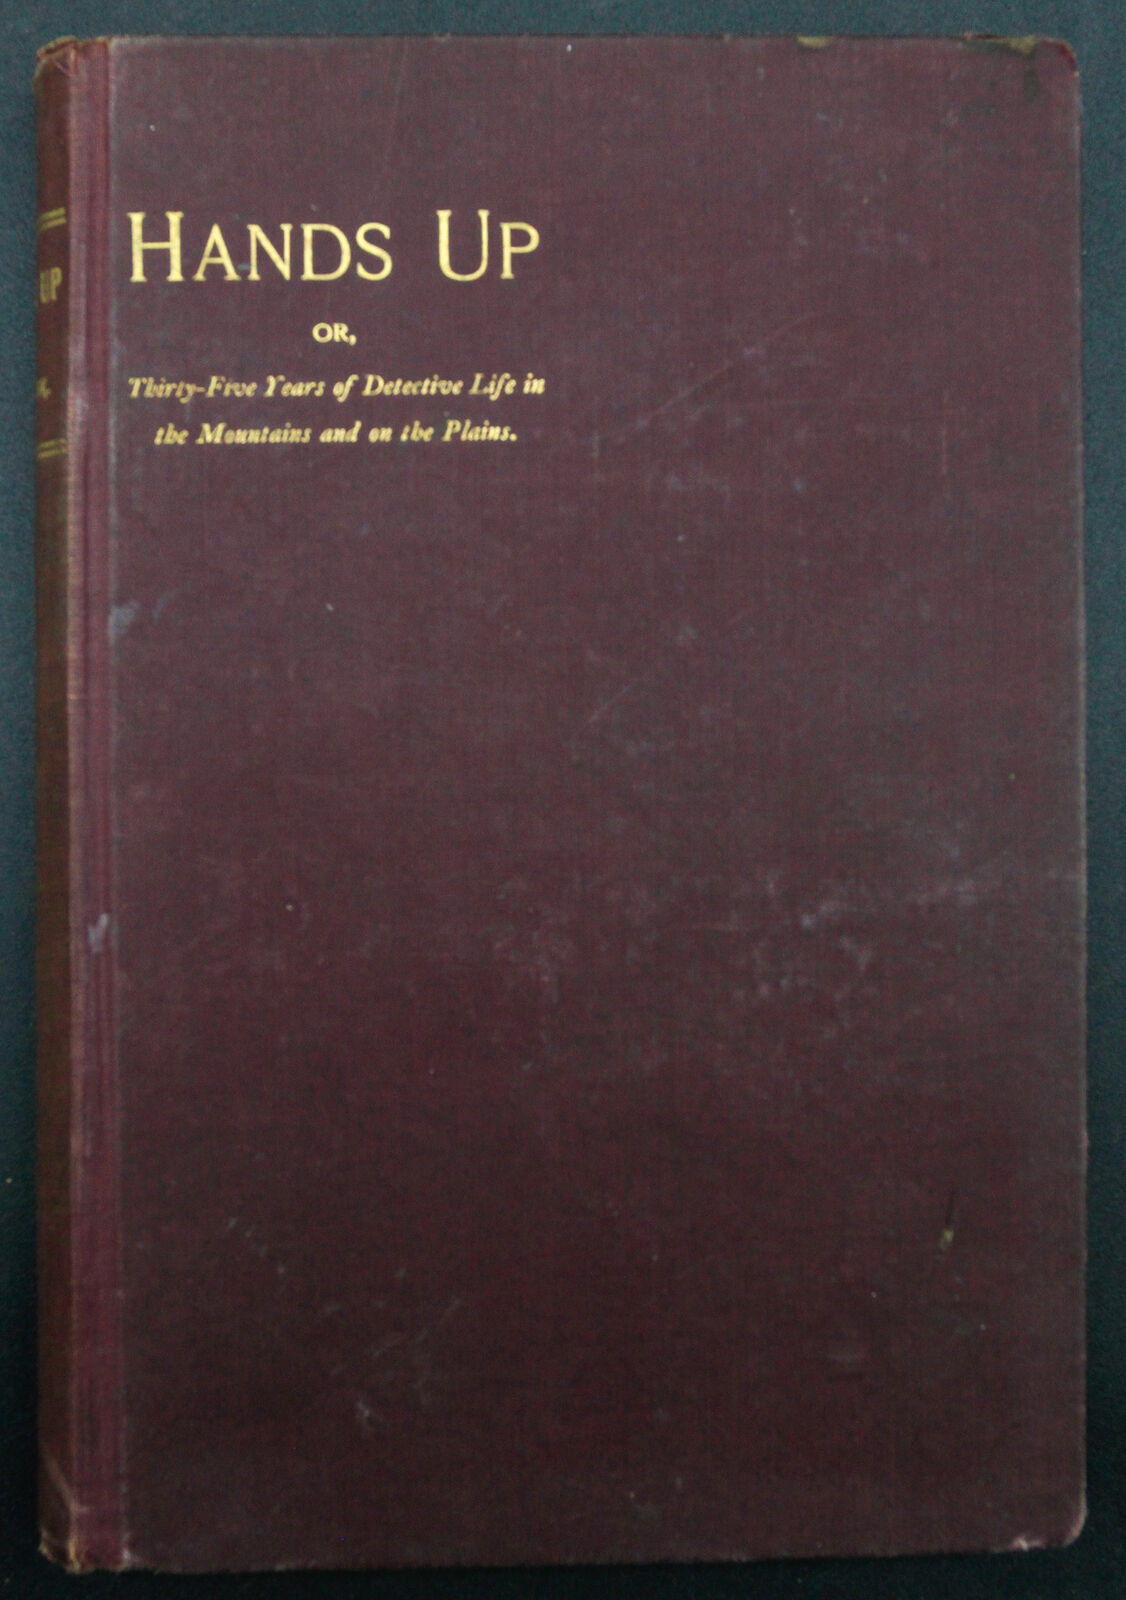 General D J Cook HANDS UP 35 Years of Detective Life 1897 outlaws WILD WEST old